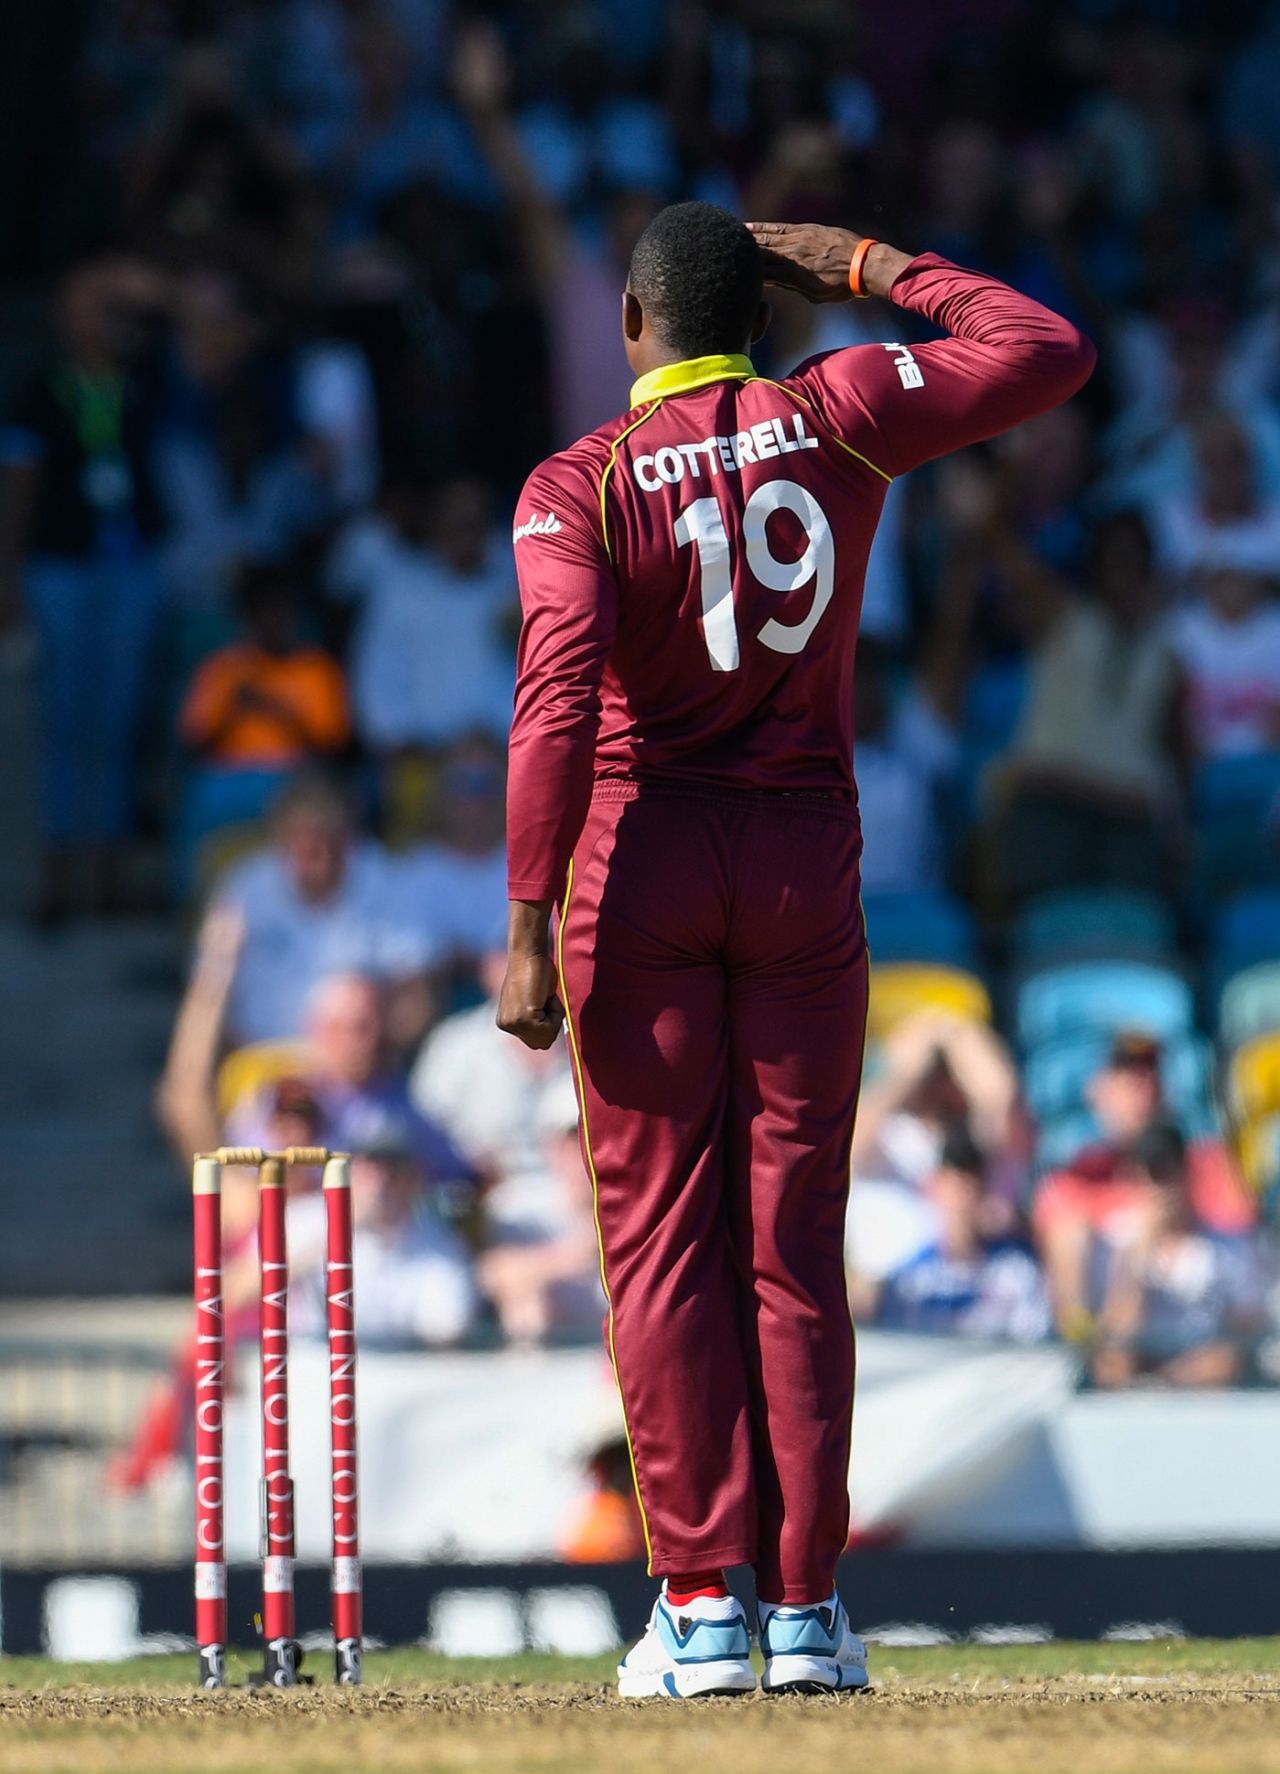 Sheldon Cottrell salutes after taking another wicket, West Indies v England, 2nd ODI, Barbados, February 22, 2019